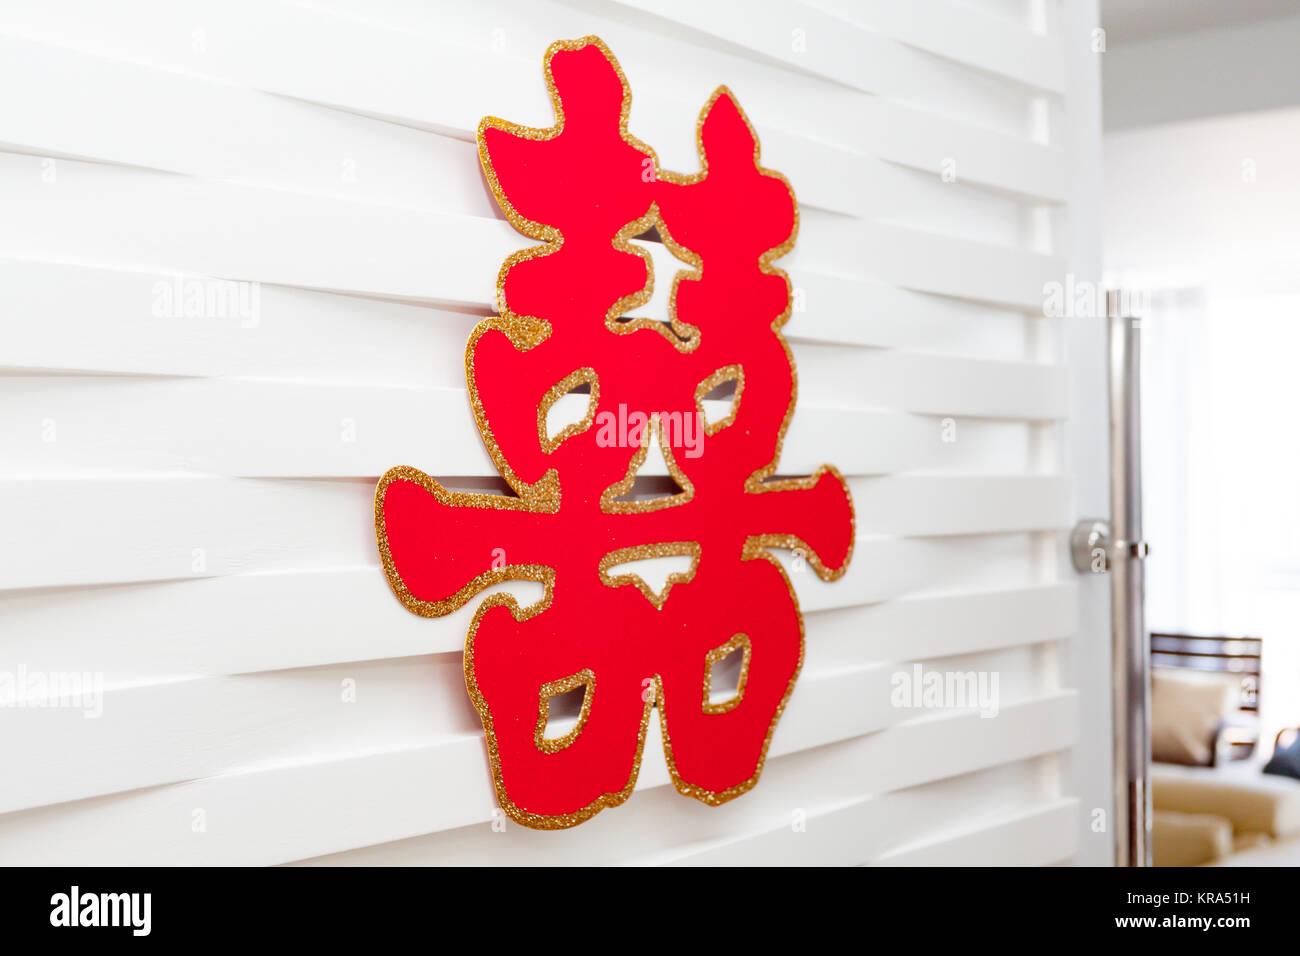 Chinese Character Happy Stock Photos & Chinese Character Happy Stock Images - Alamy